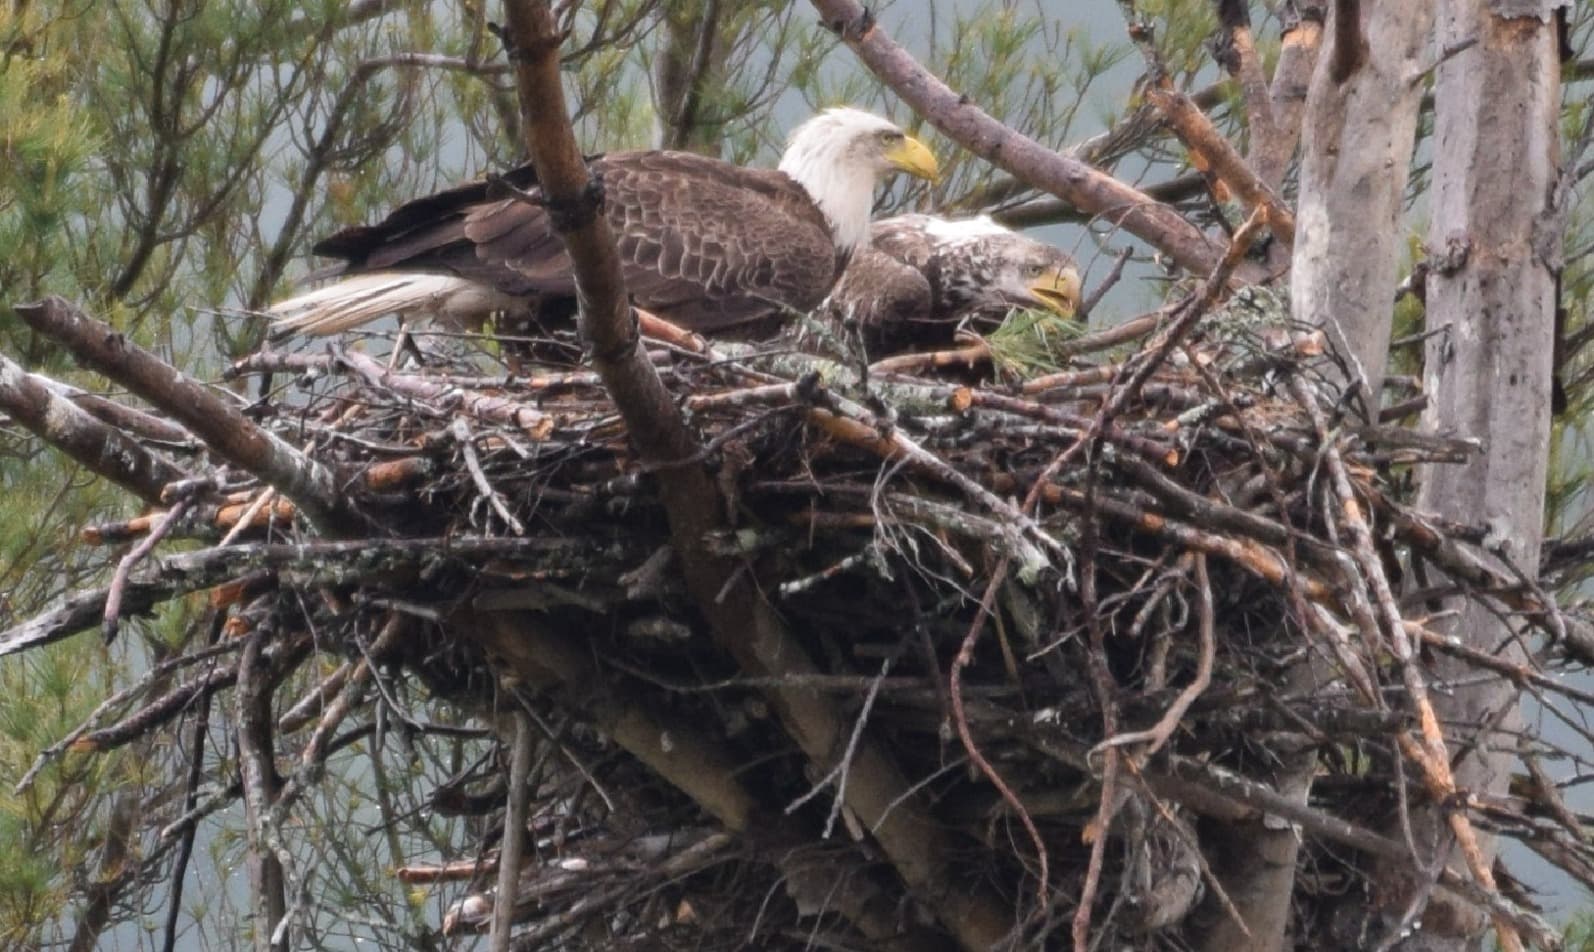 19.	Eagle nest photographed from the dock